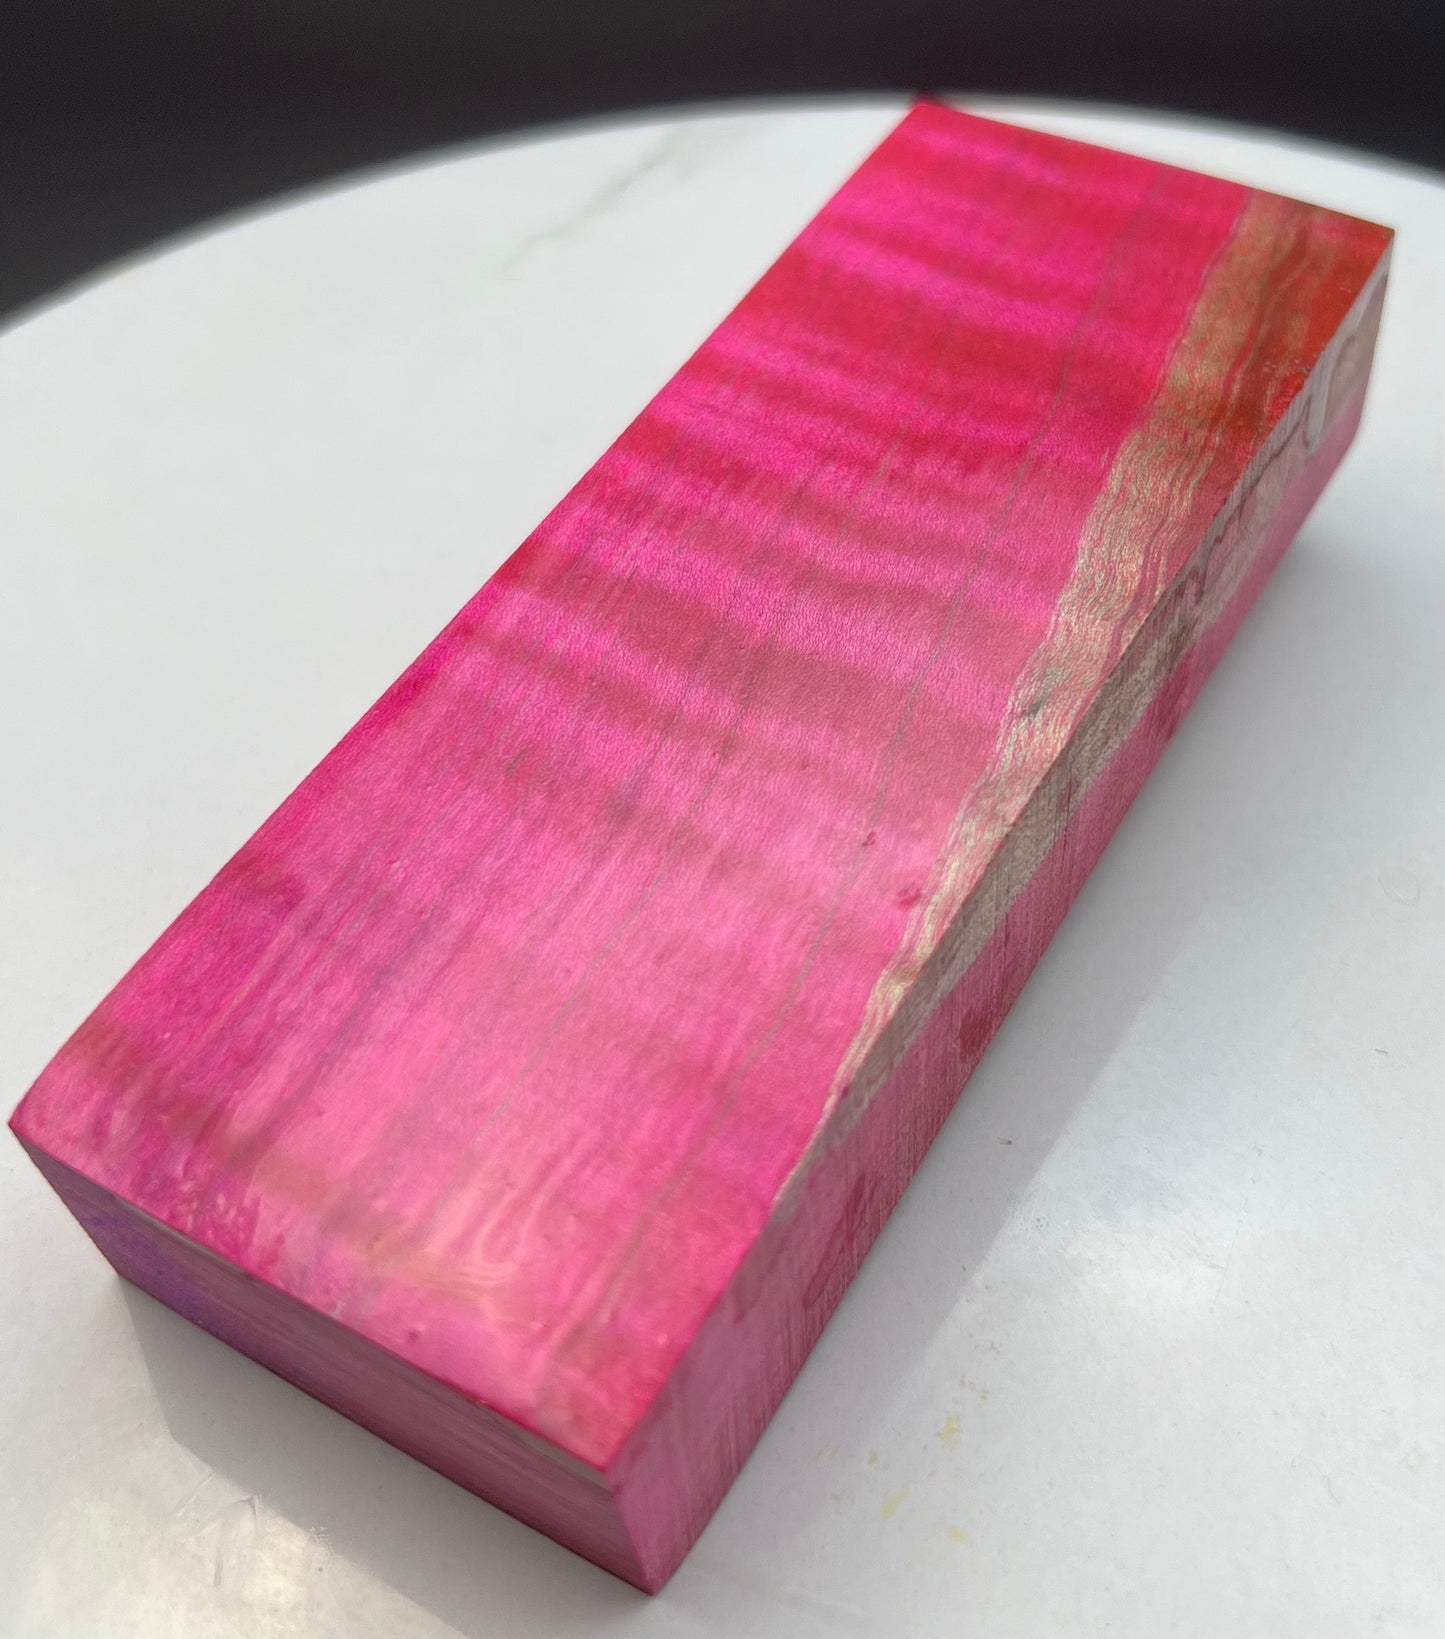 Stabilized Curly Maple KnifeBlock Hot Pink